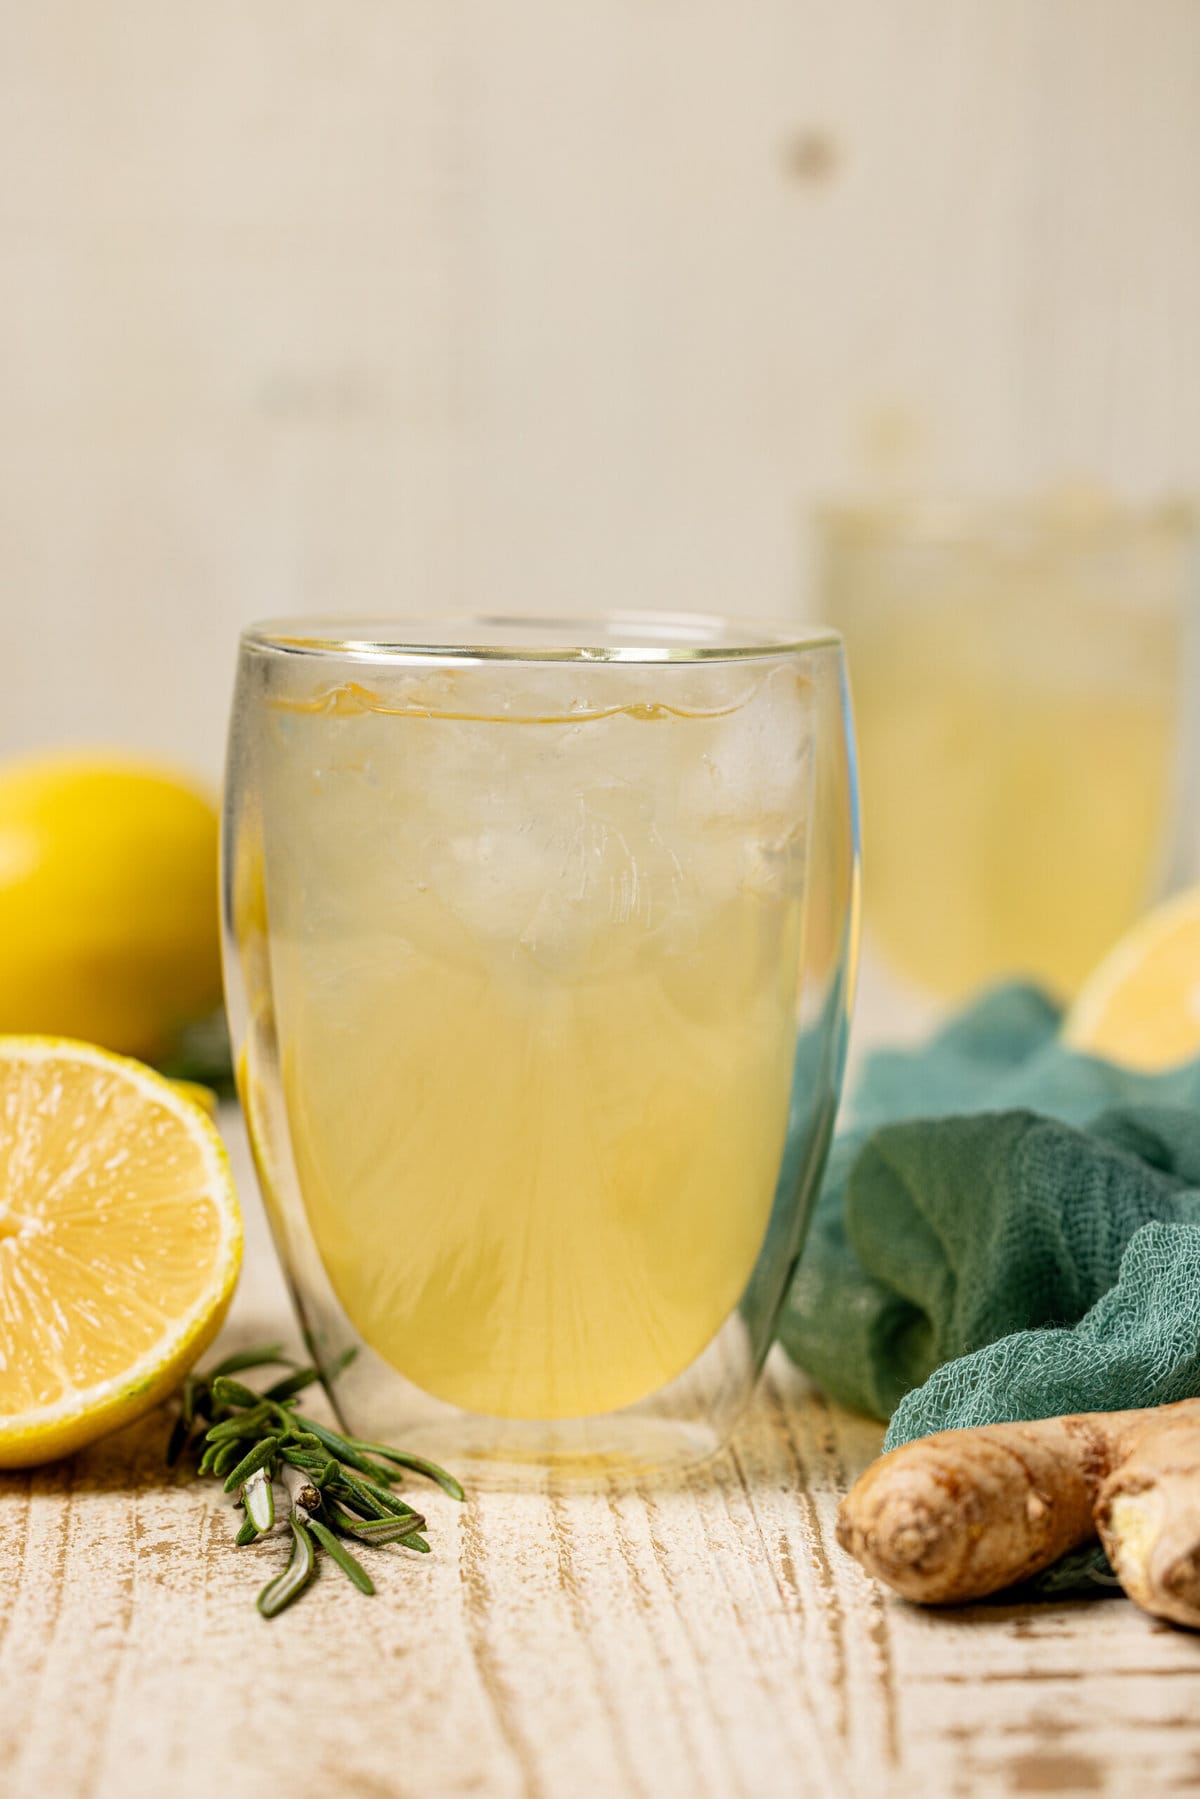 Two glasses of ginger ale with lemon, ginger root, and rosemary.